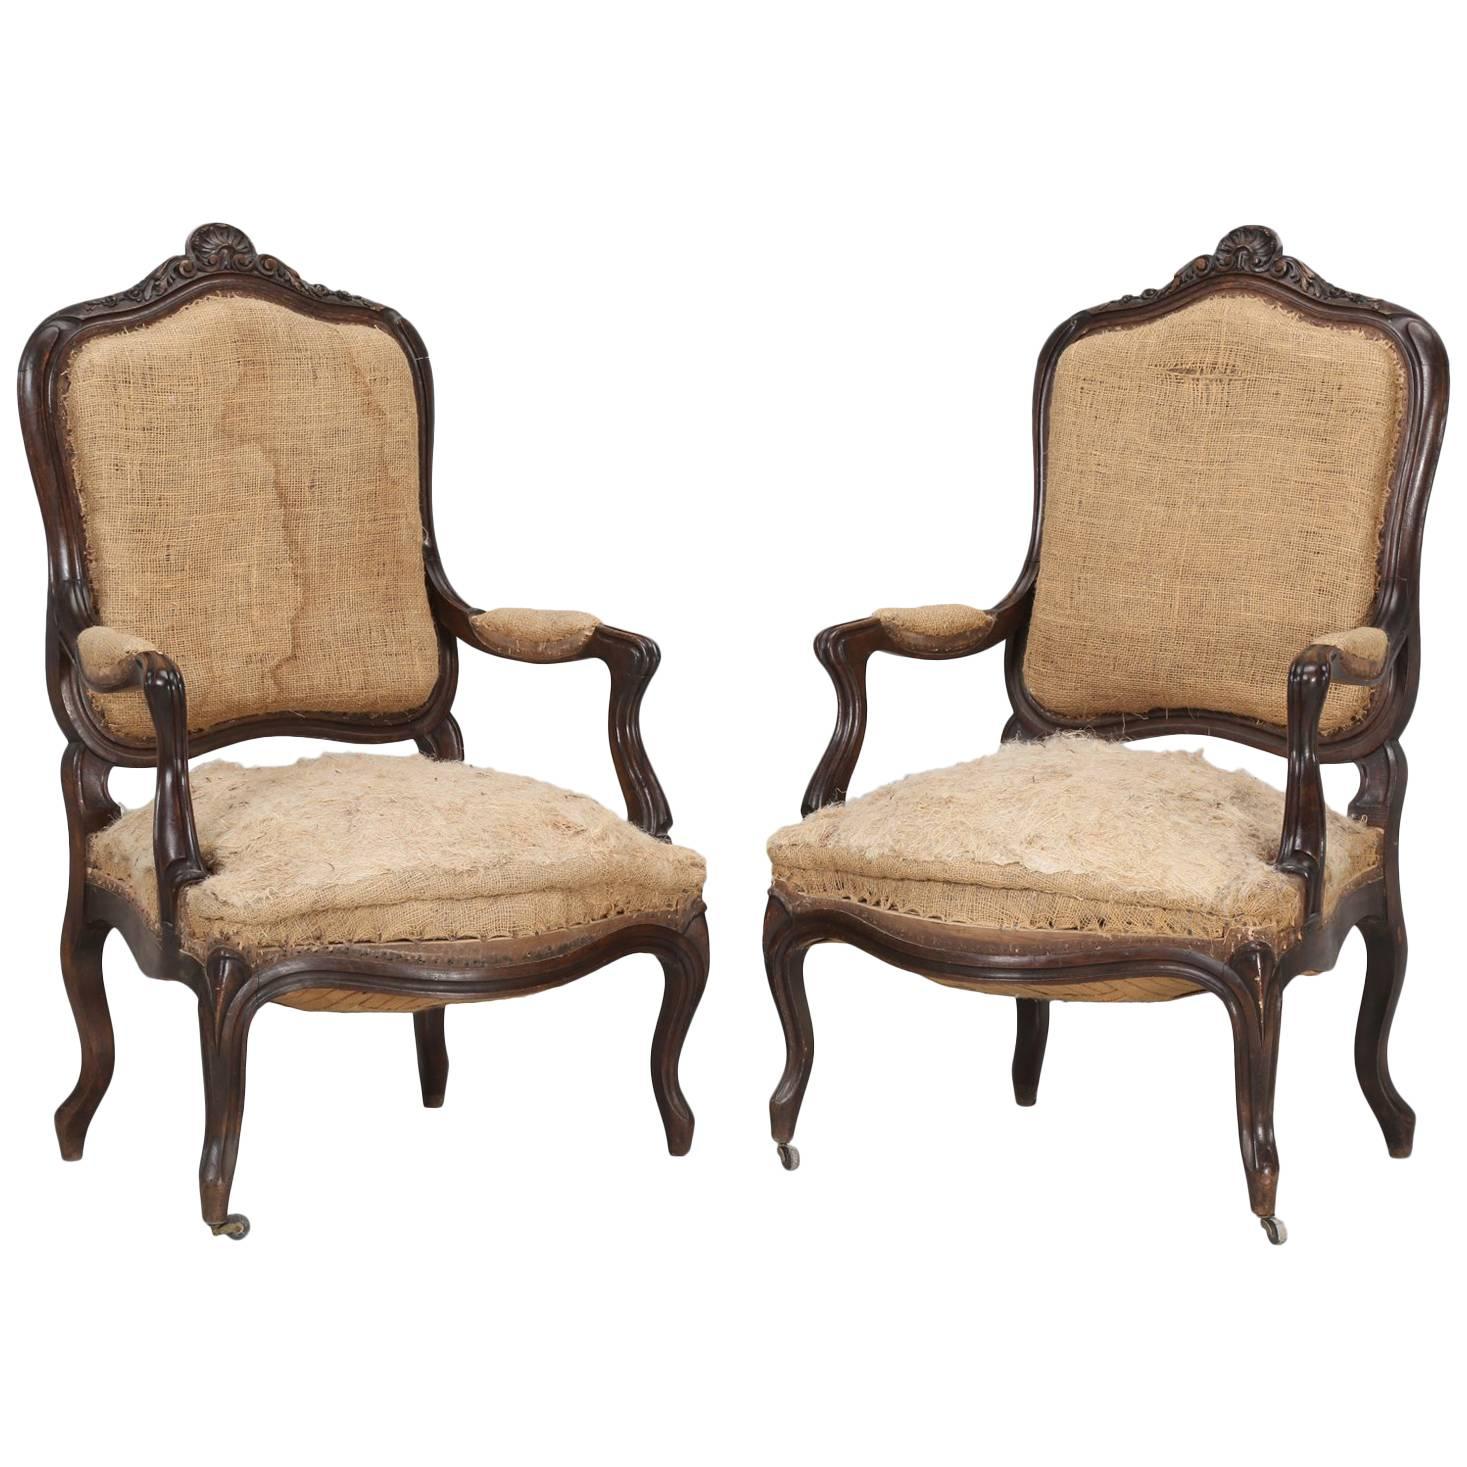 Pair of Antique French Carved Parlor or Living Room Armchairs